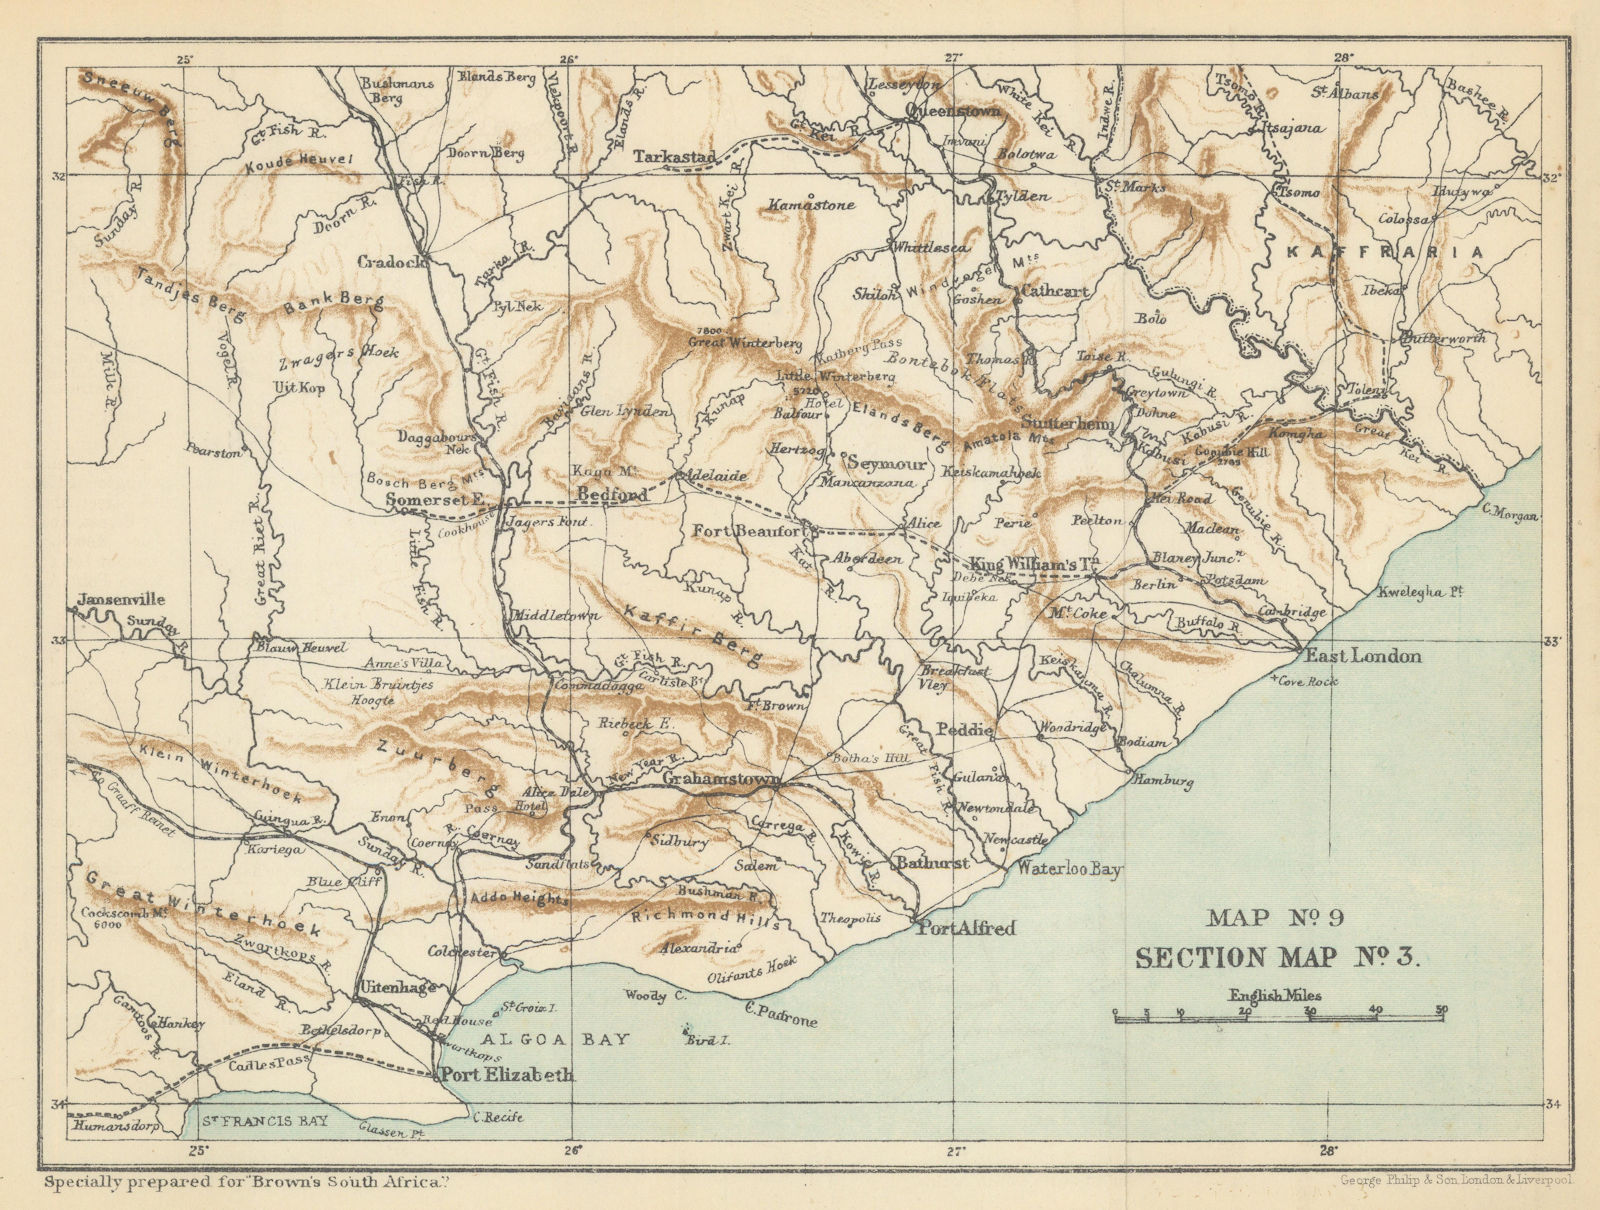 South Africa - Eastern Southern Provinces of Cape Colony. SAMLER BROWN 1899 map